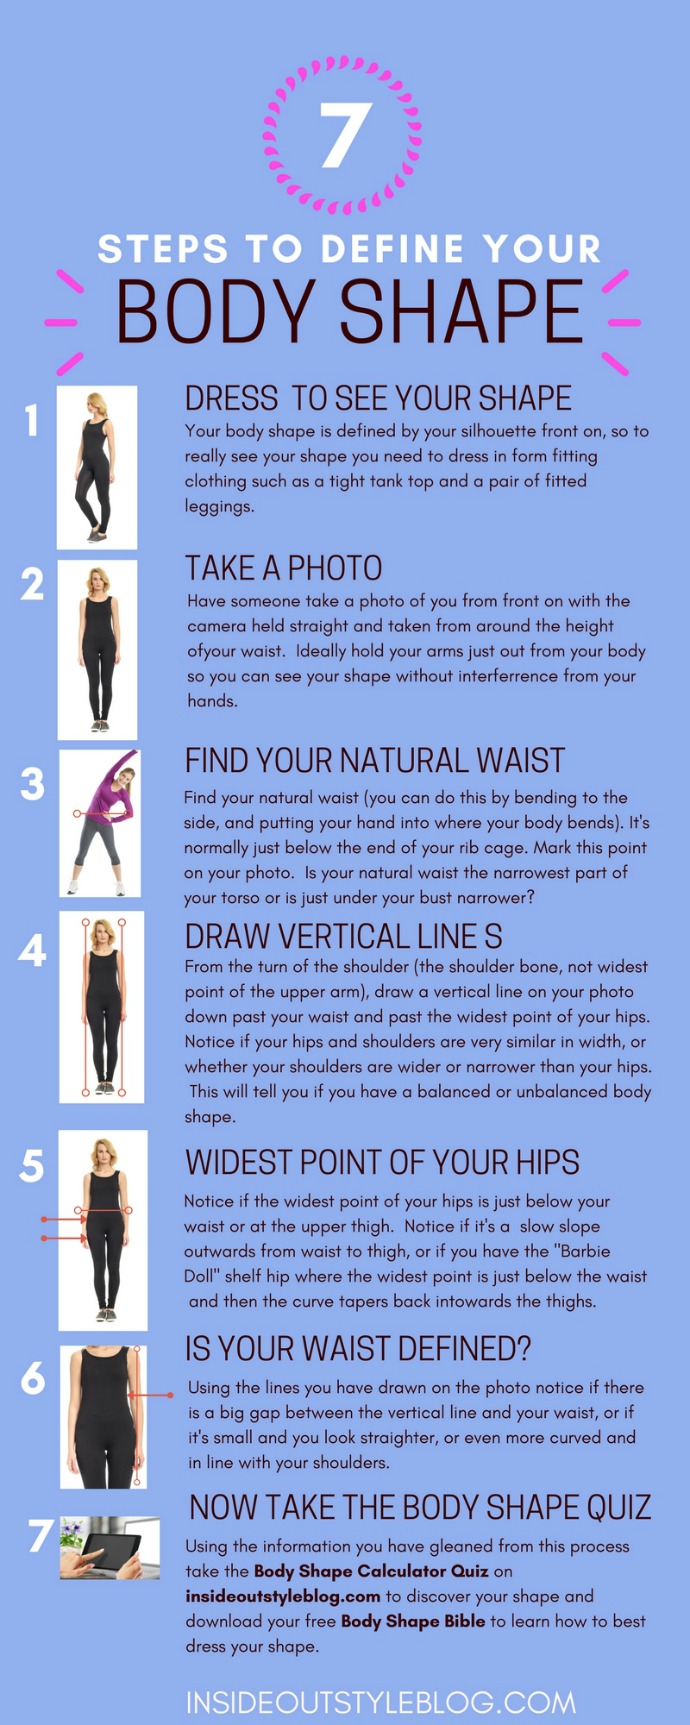 Understanding Your Body Shape - do the body shape calculator quiz and discover your shape then download your free body shape bible to learn how to dress your shape